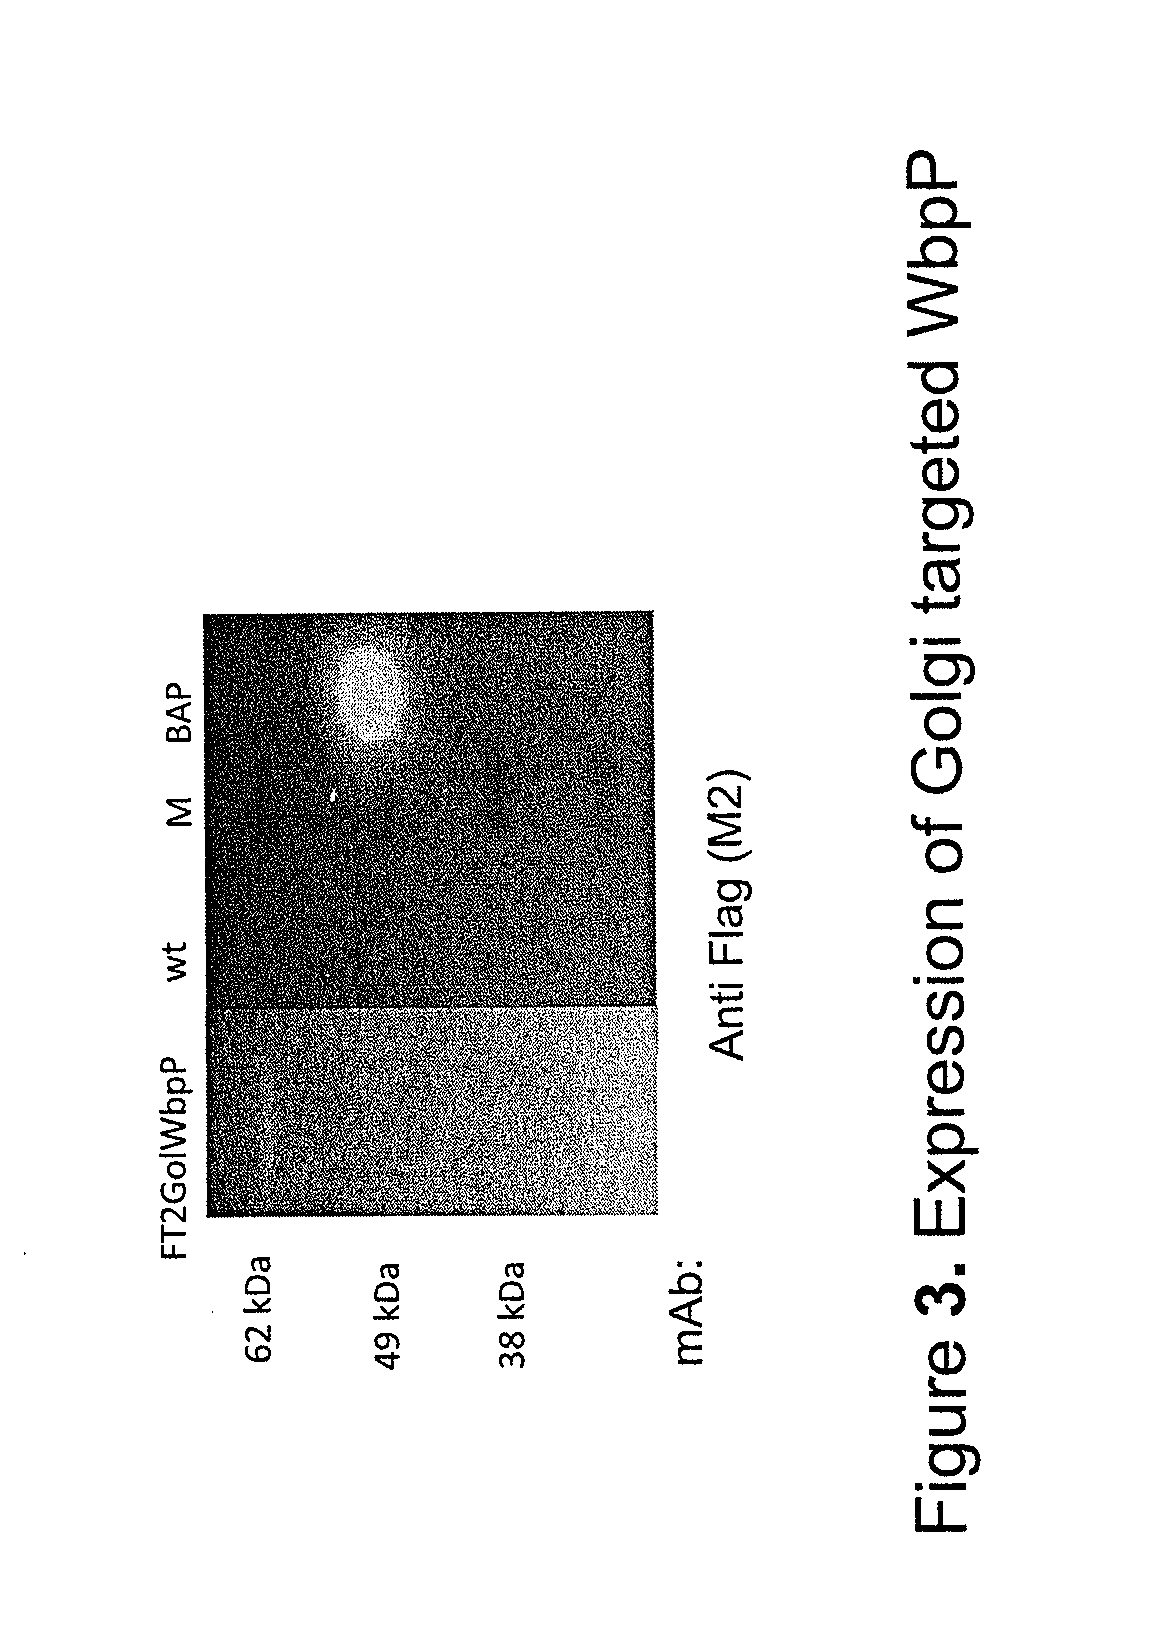 Methods for glyco-engineering plant cells for controlled human o-glycosylation